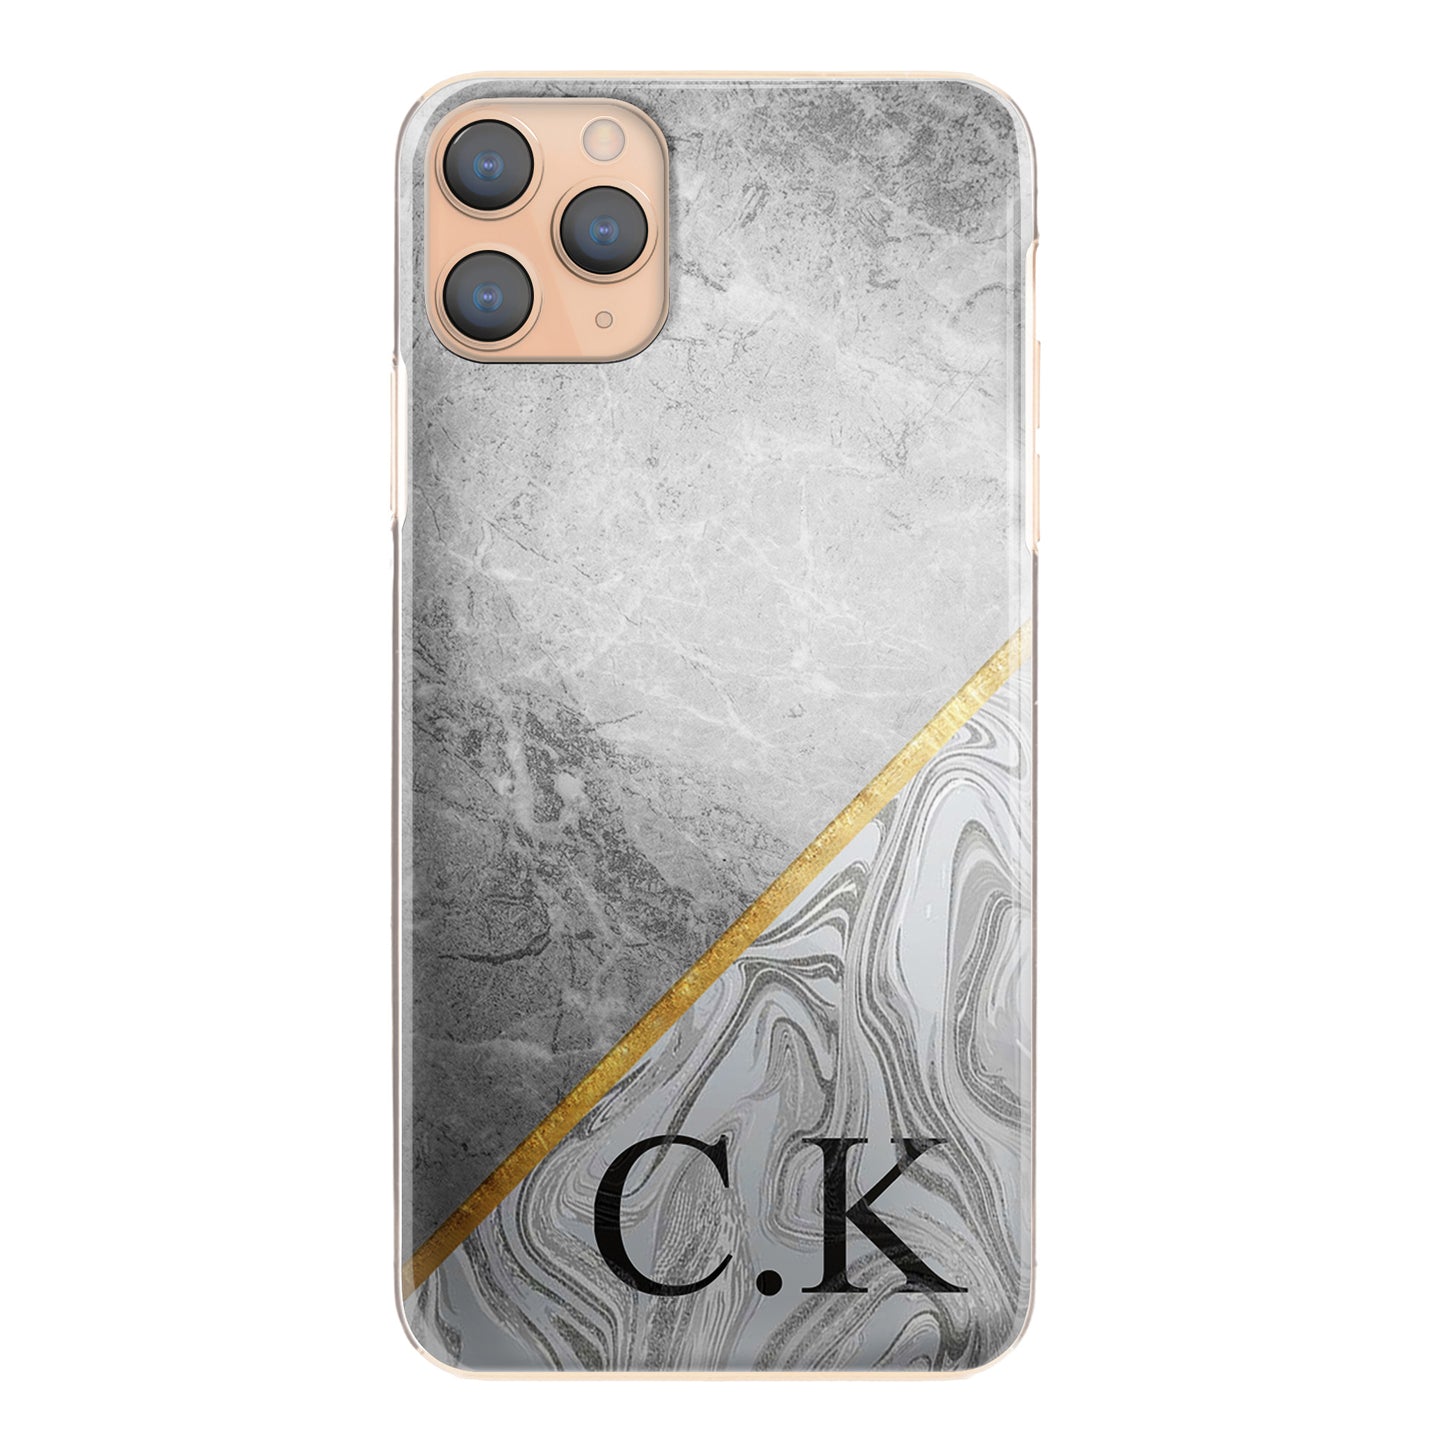 Personalised Nokia Phone Hard Case with Traditional Initials on Stylish Dual Marble